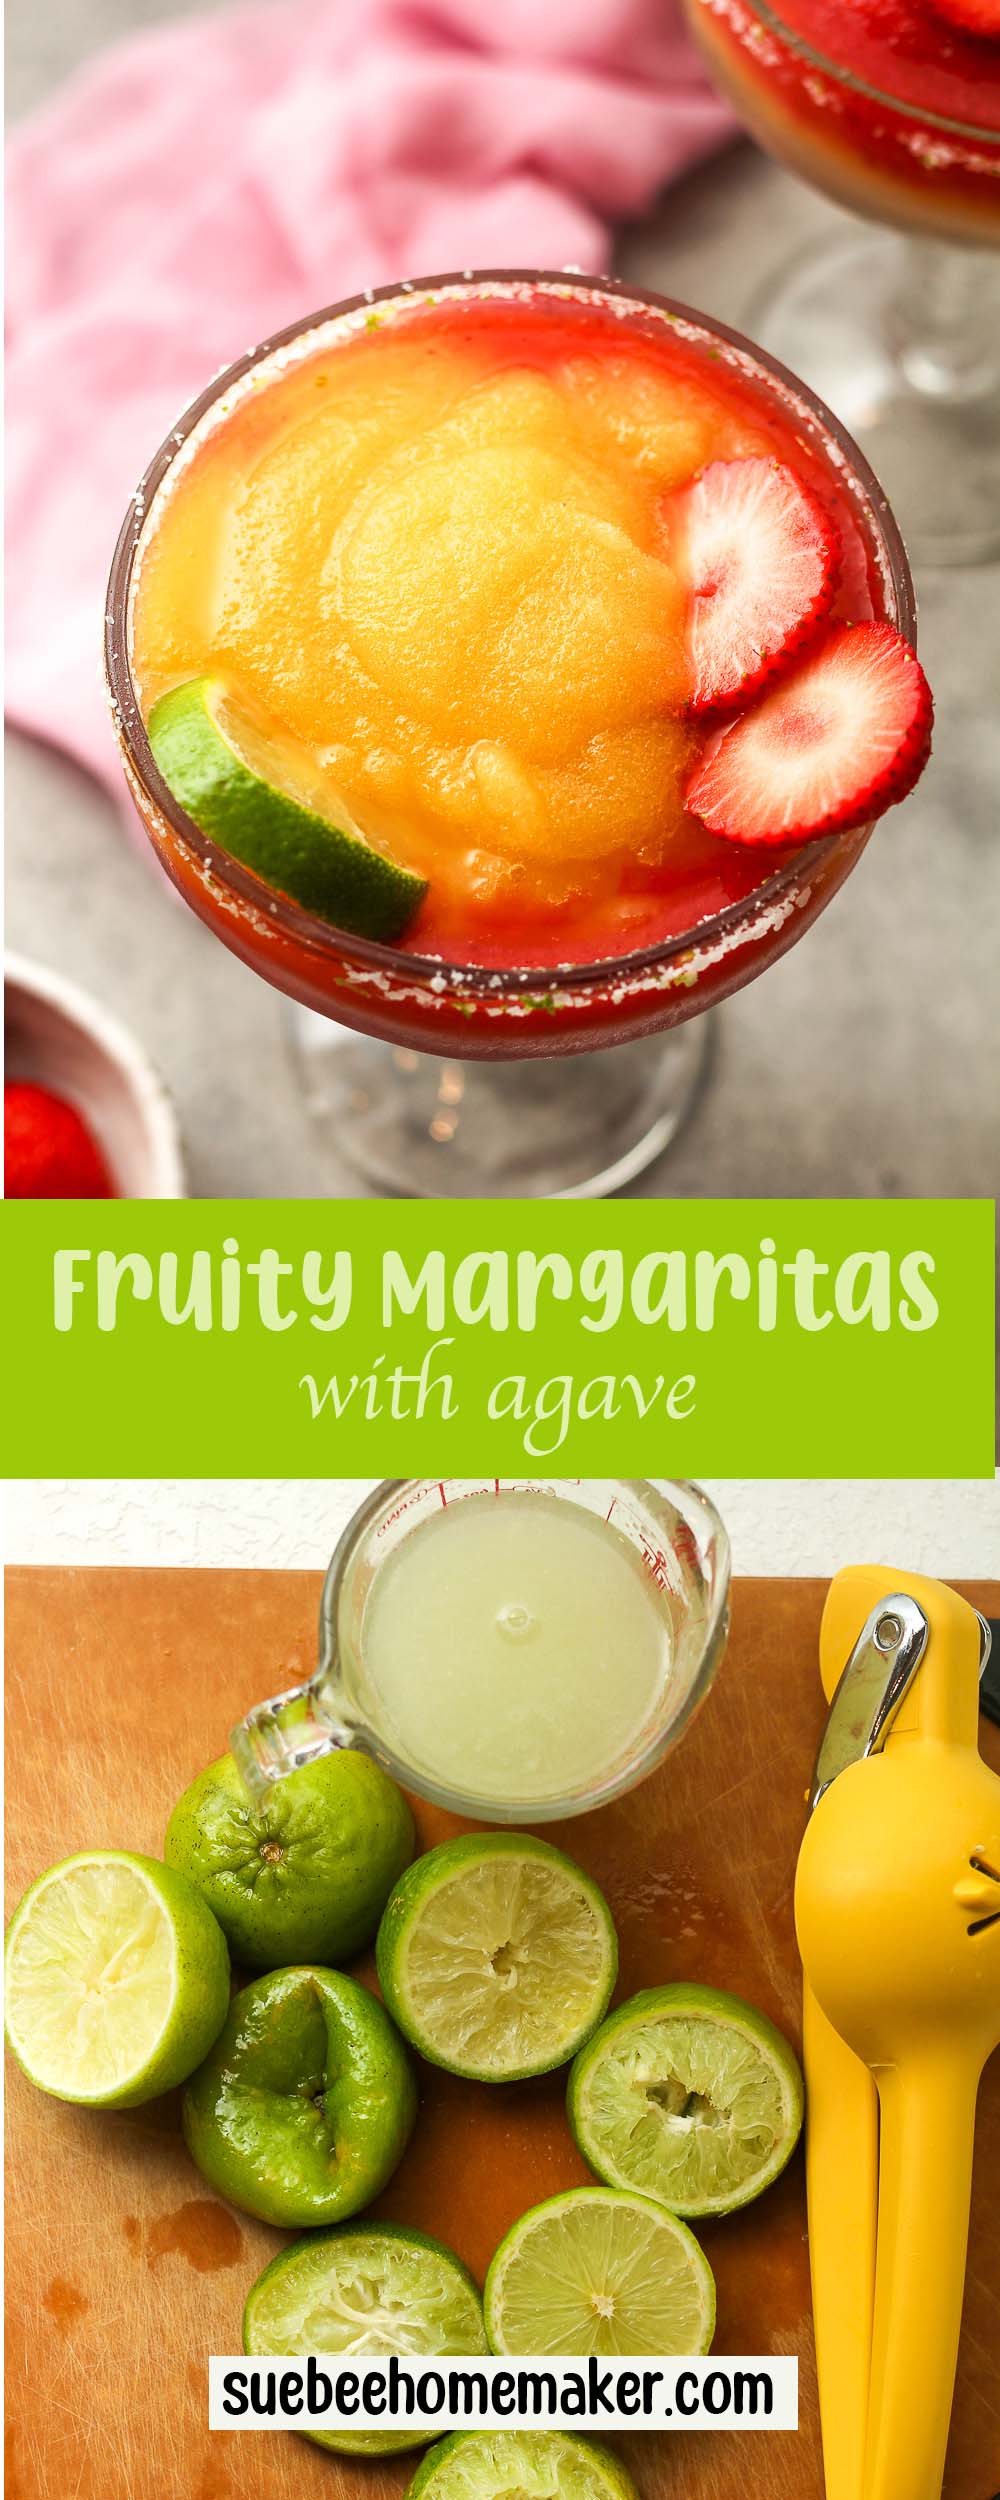 A collage of photos for fruity margaritas with agave.